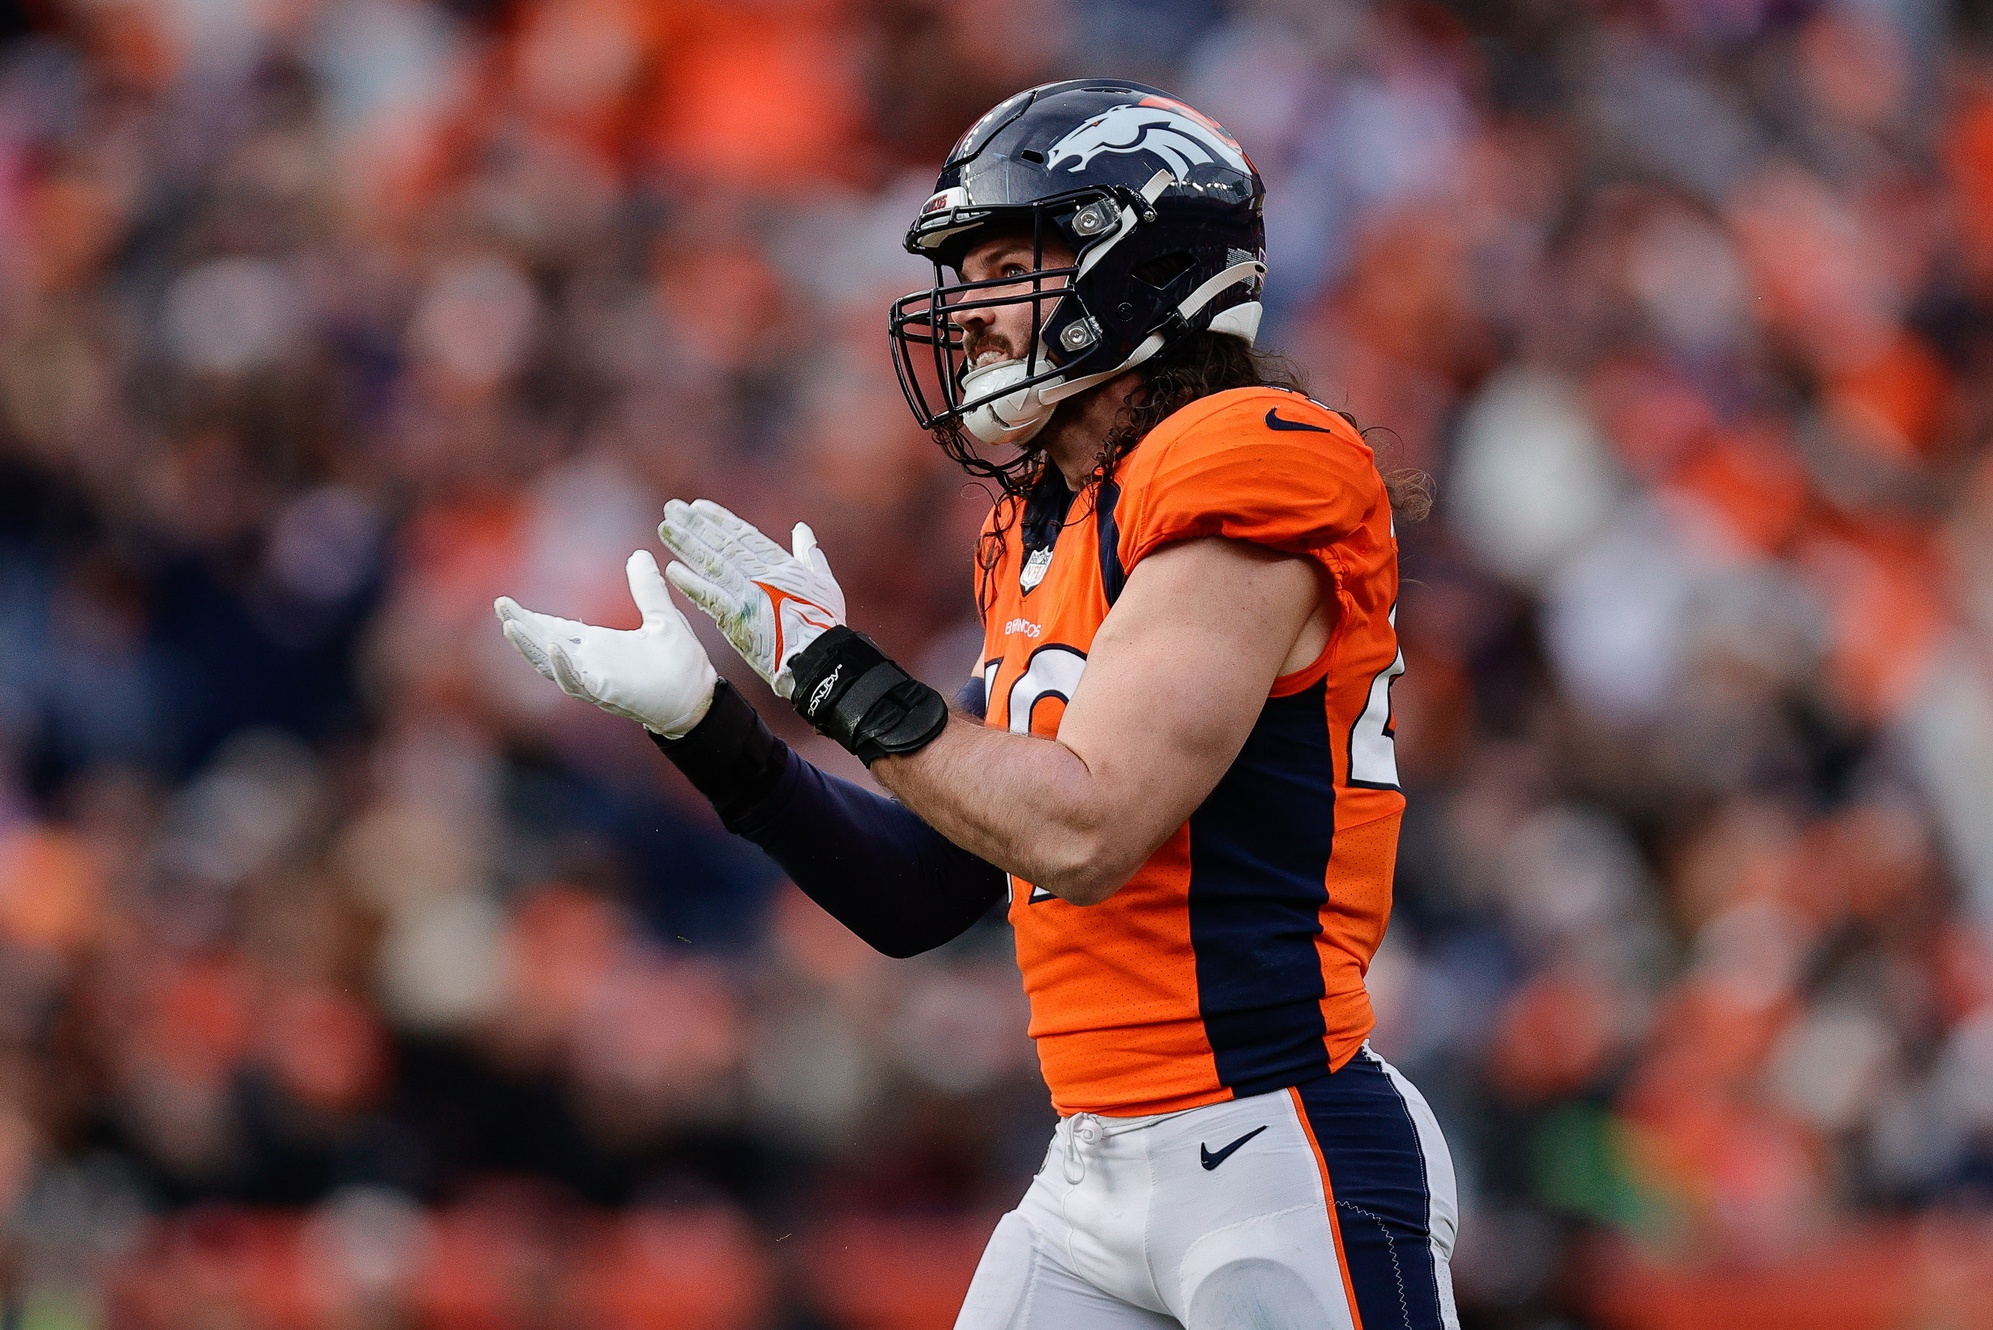 Denver Broncos linebacker Alex Singleton (49) reacts after a play in the second quarter against the Los Angeles Chargers at Empower Field at Mile High.